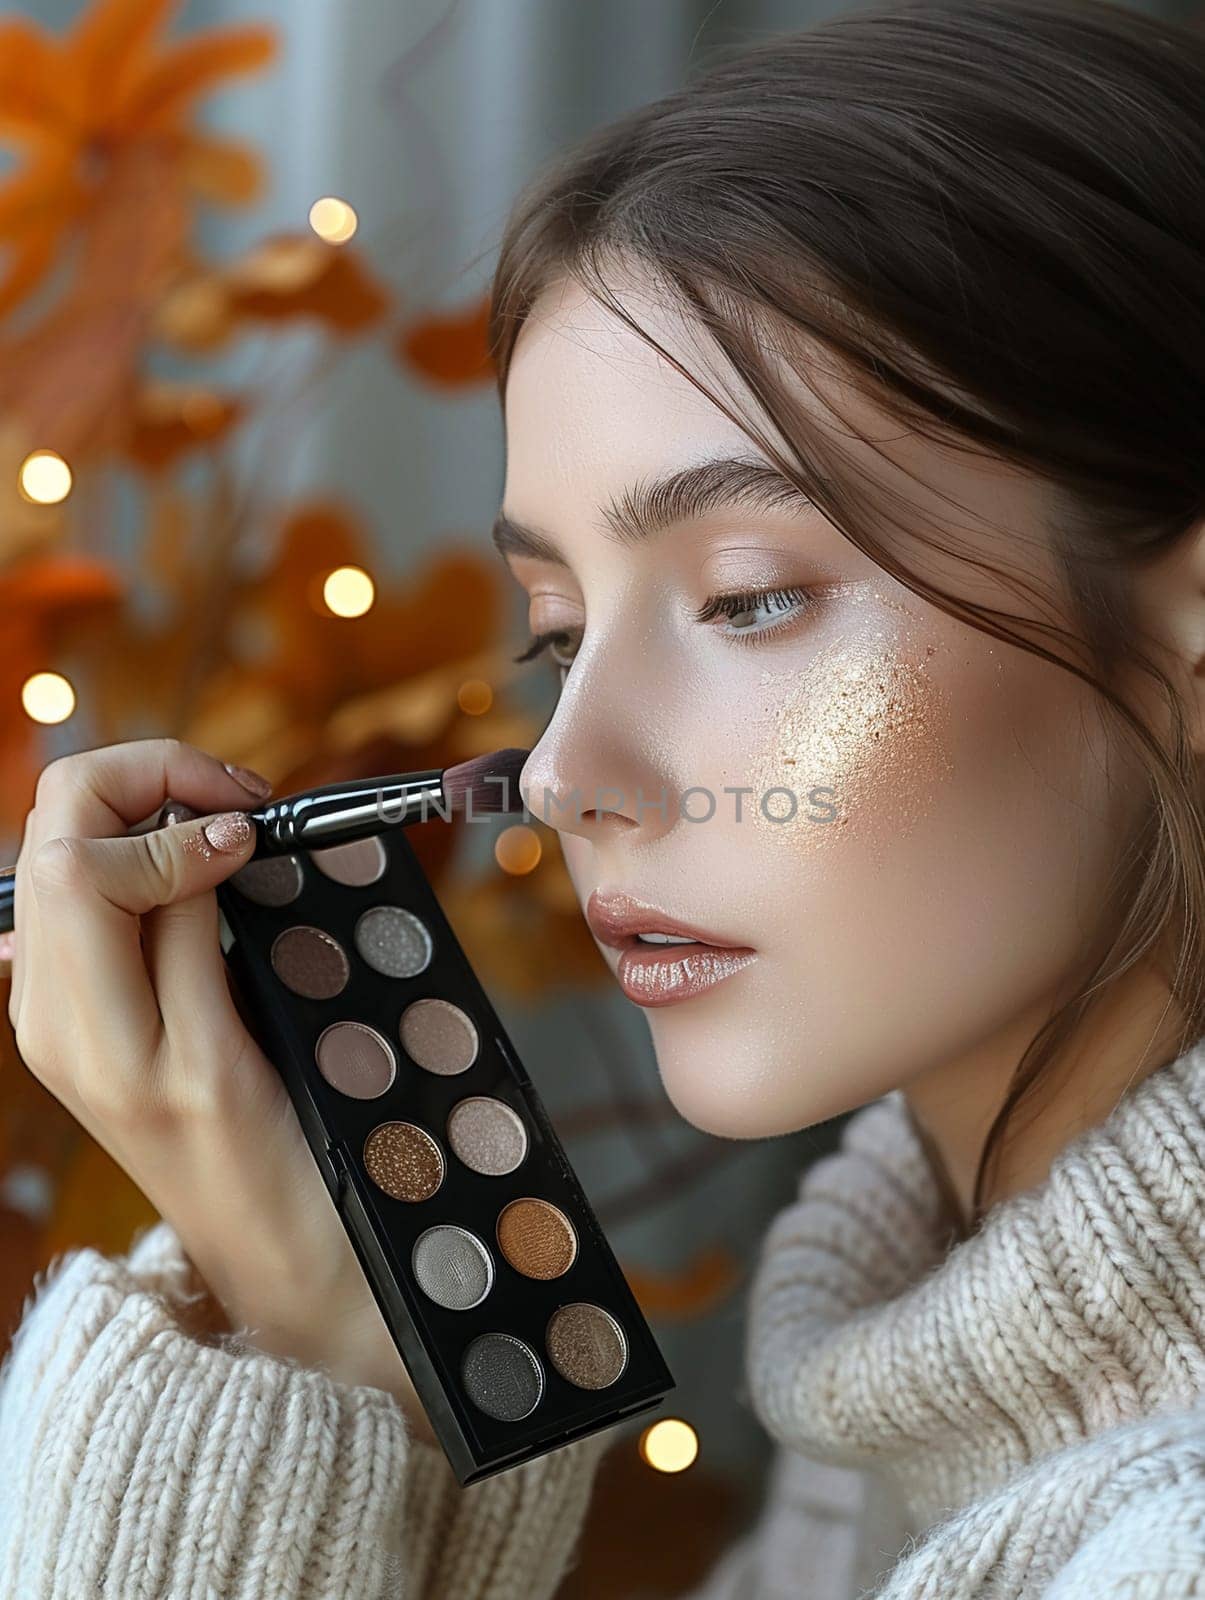 Fingers gently holding a makeup brush against a palette, symbolizing beauty routine.